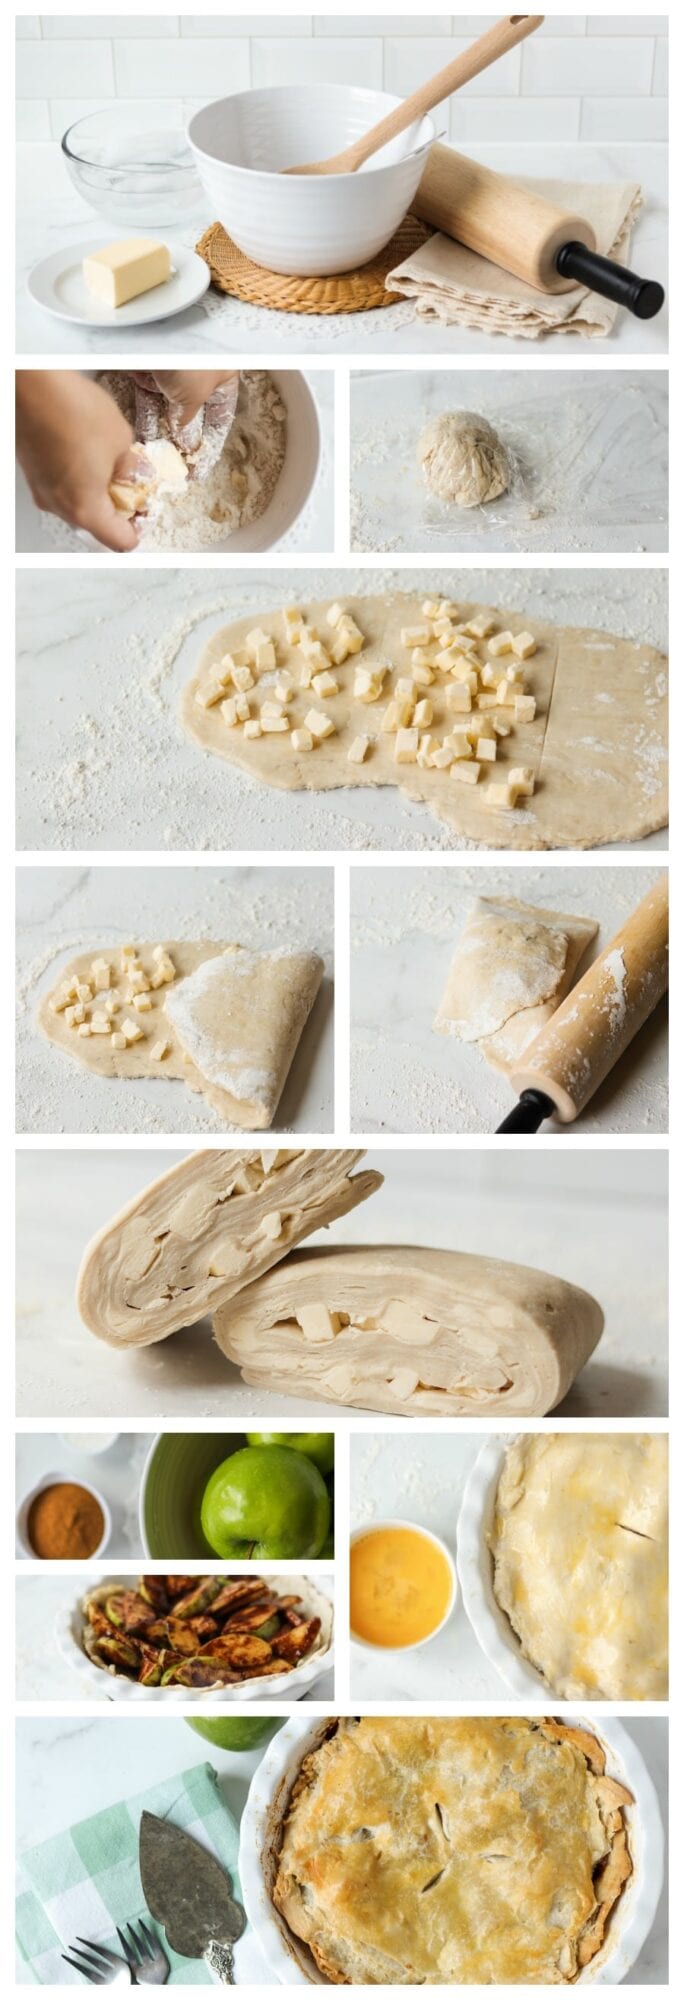 step by step making the puff pastry